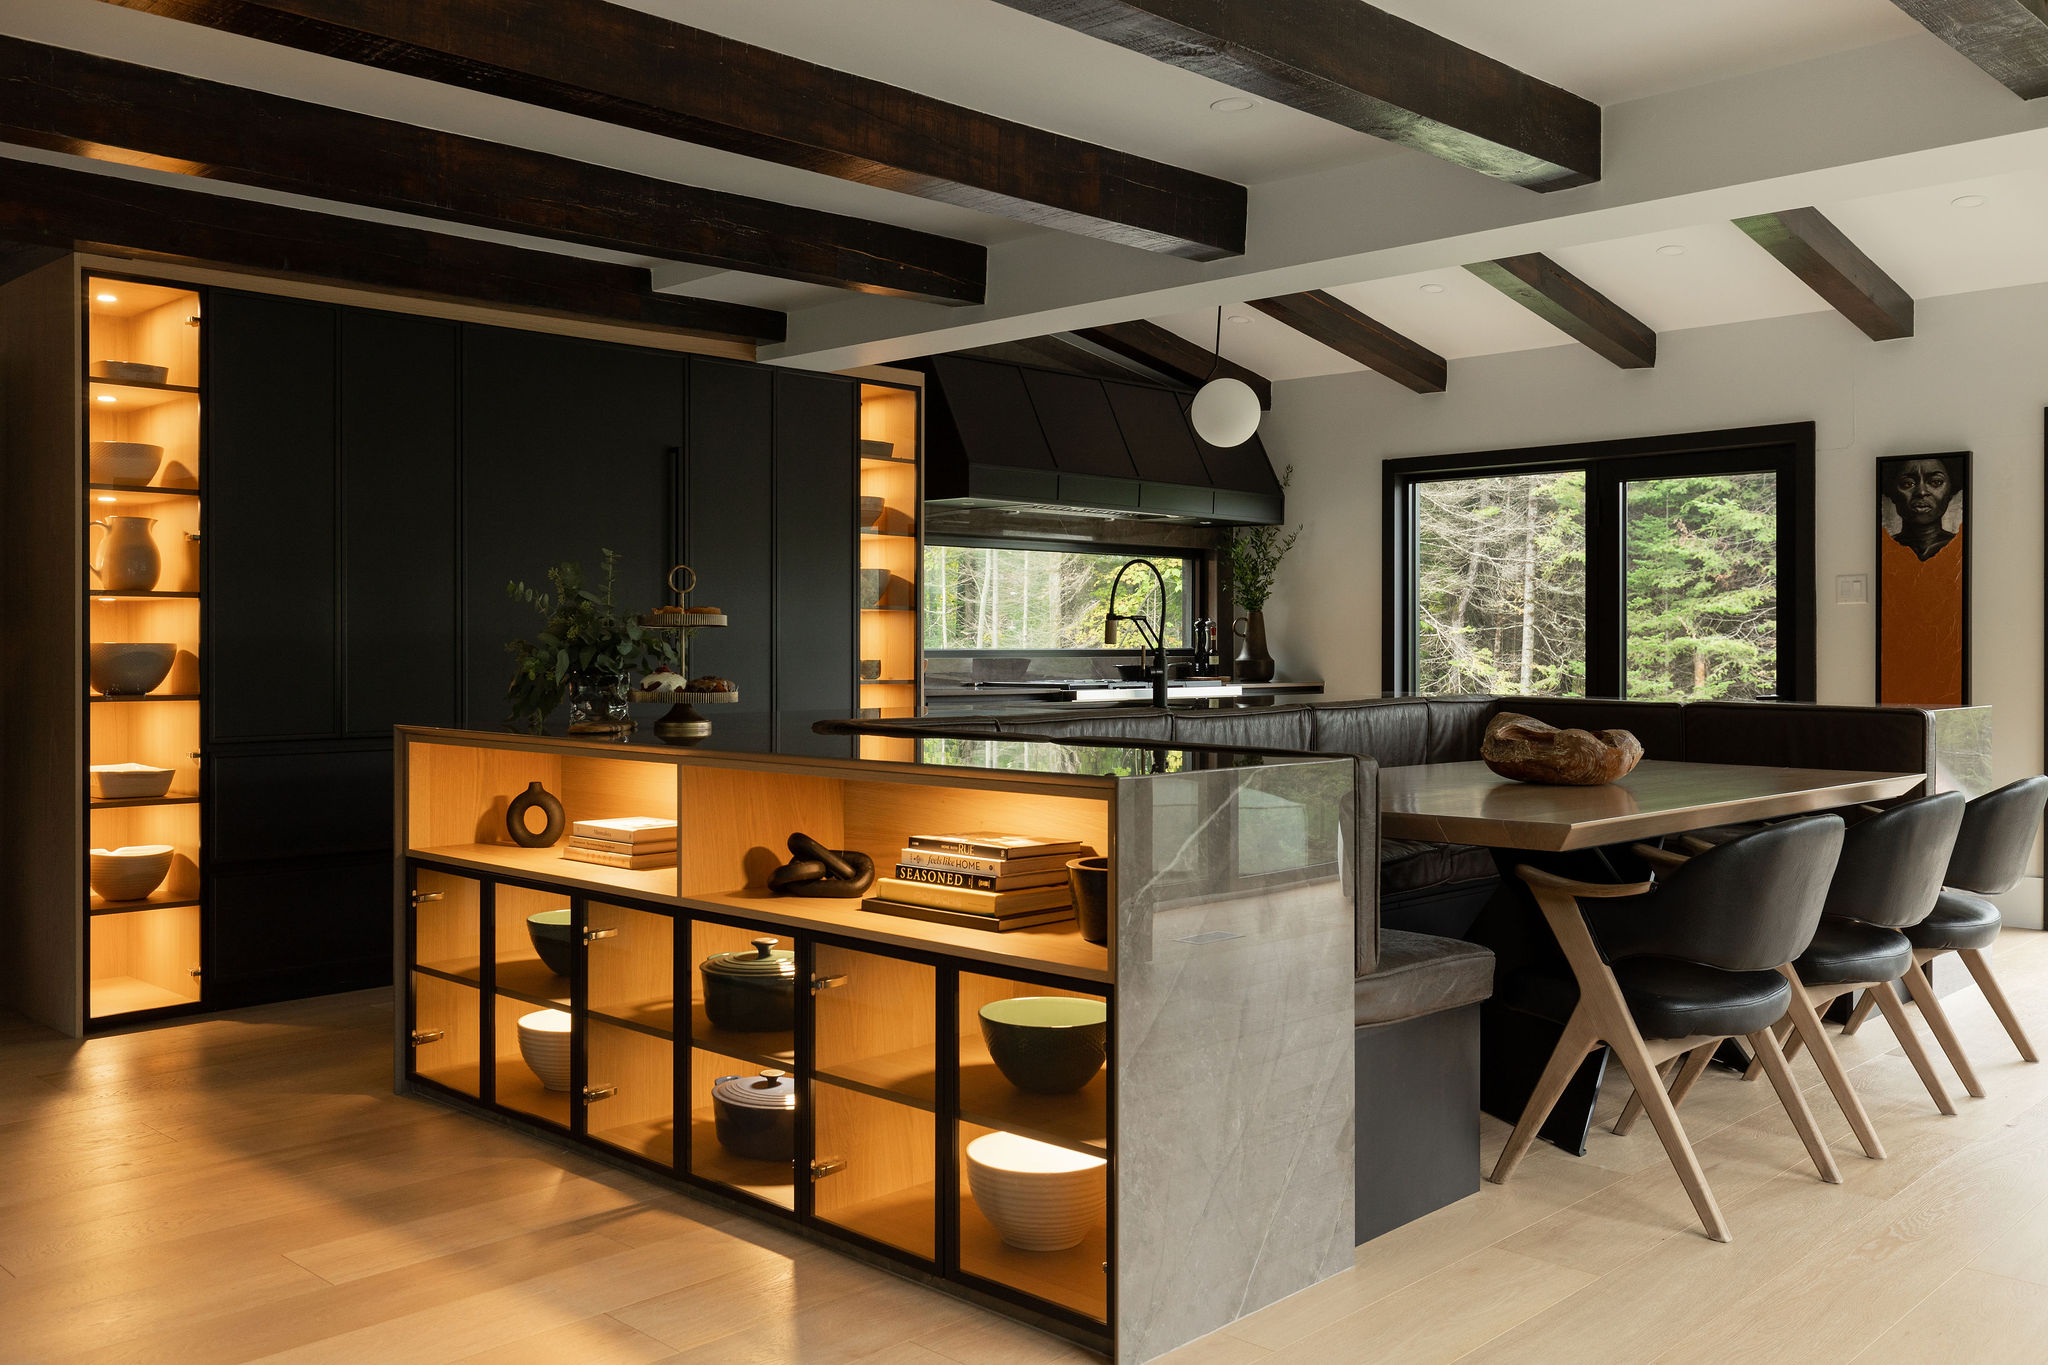 Modern kitchen with central island in spacious house.